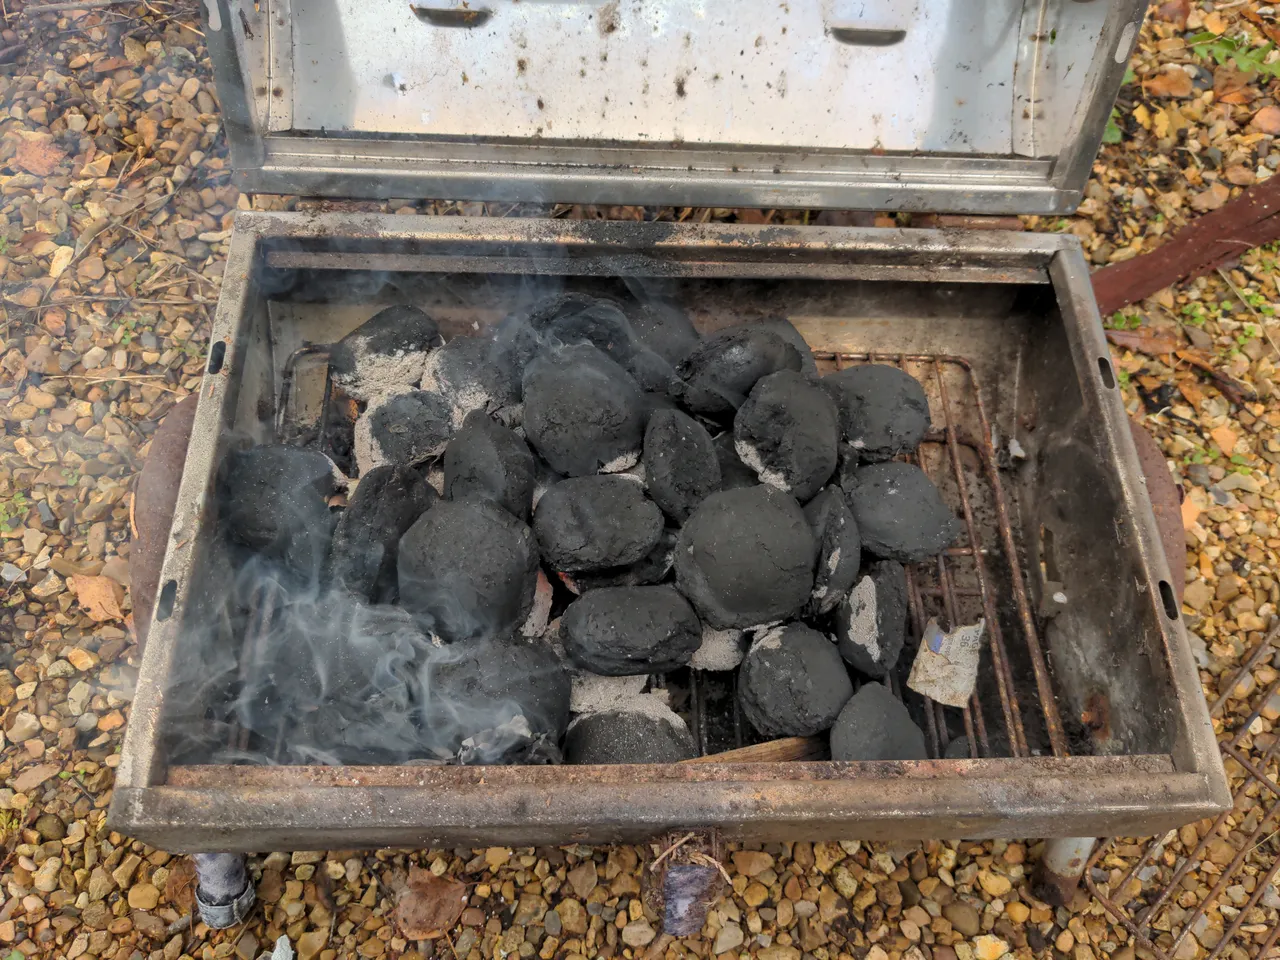 A small barbecue, with some charcoal that has started to turn grey.